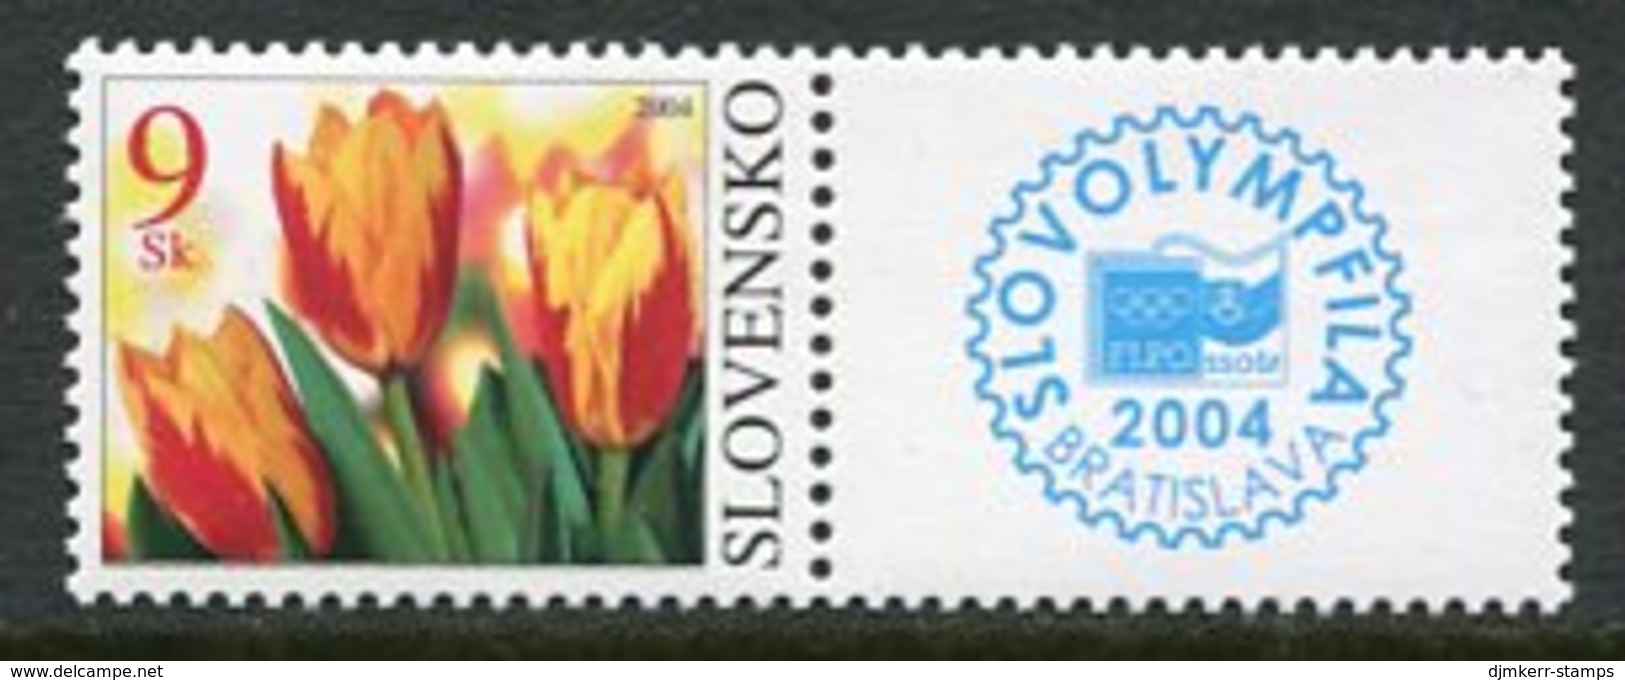 SLOVAKIA 2004 Greetings Stamp  MNH / **.  Michel 479 Zf - Unused Stamps